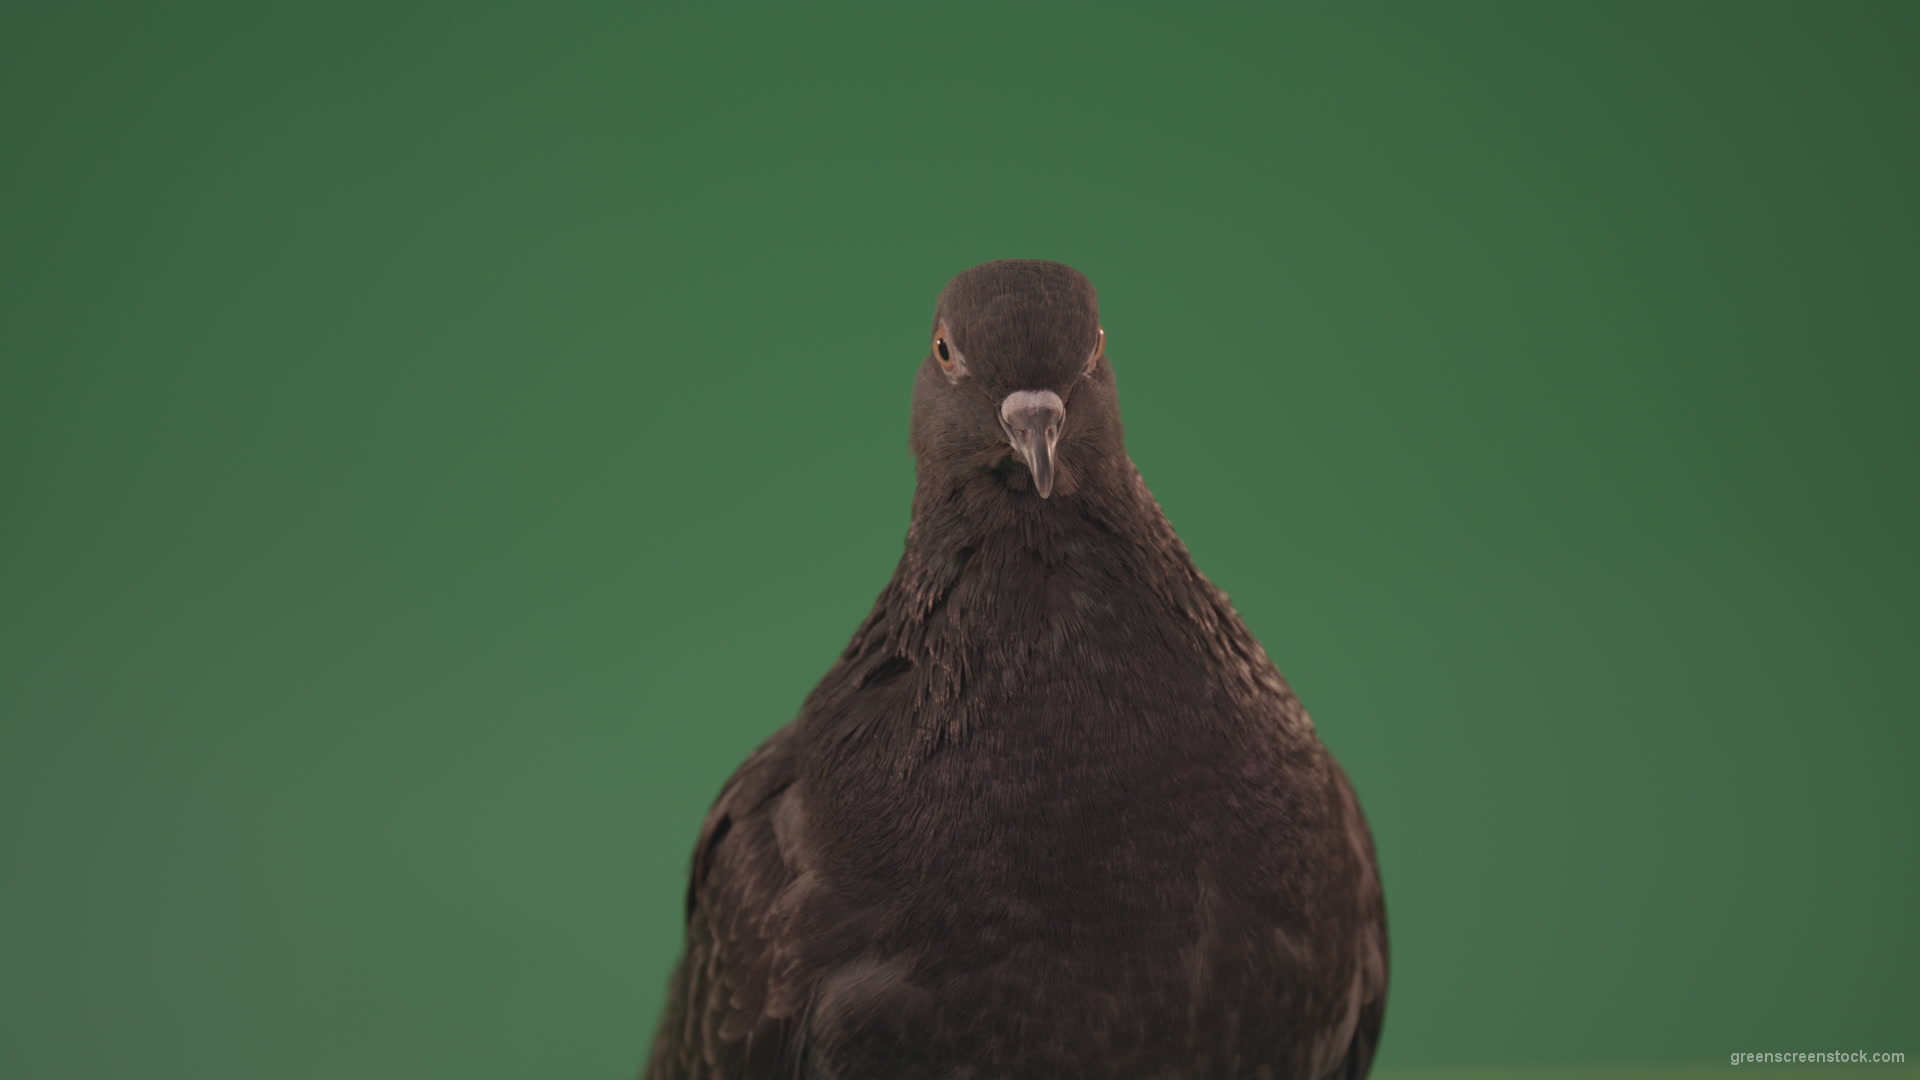 Bird-of-pigeon-is-sitting-on-the-house-and-looking-at-the-city-isolated-on-chromakey-background_005 Green Screen Stock